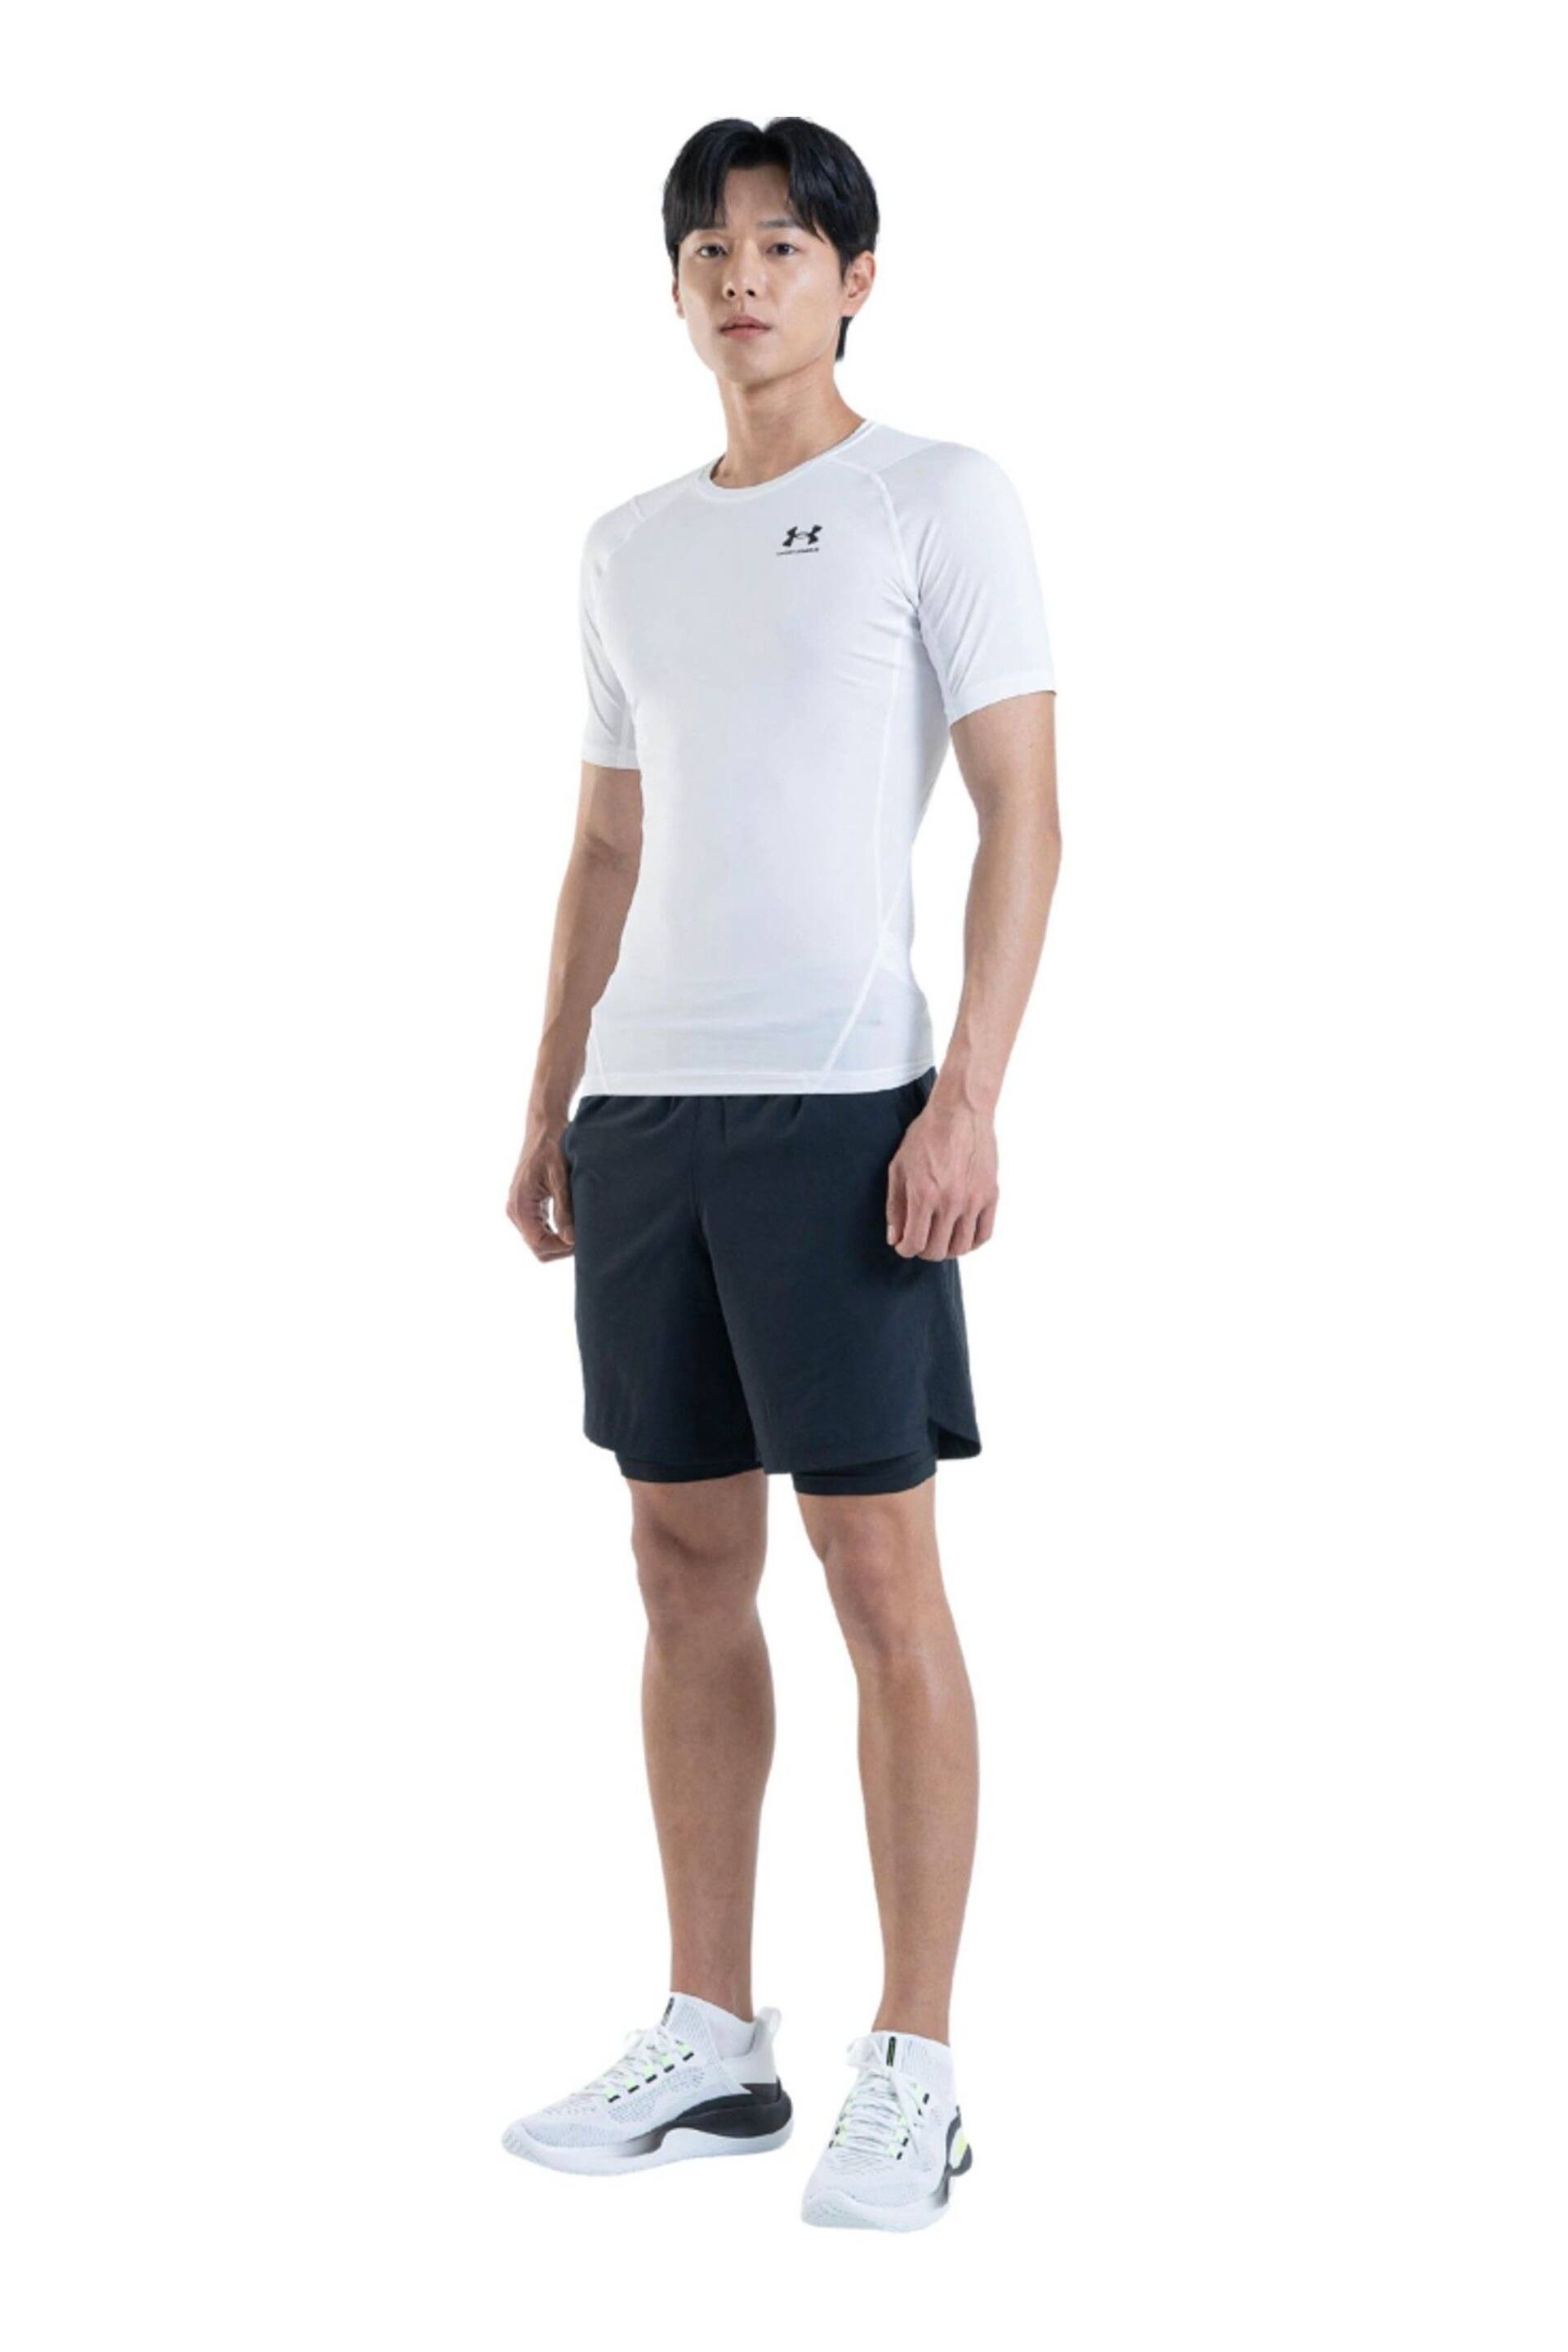 Under Armour White/Black Heatgear Short Sleeve Compression Top - Image 2 of 4